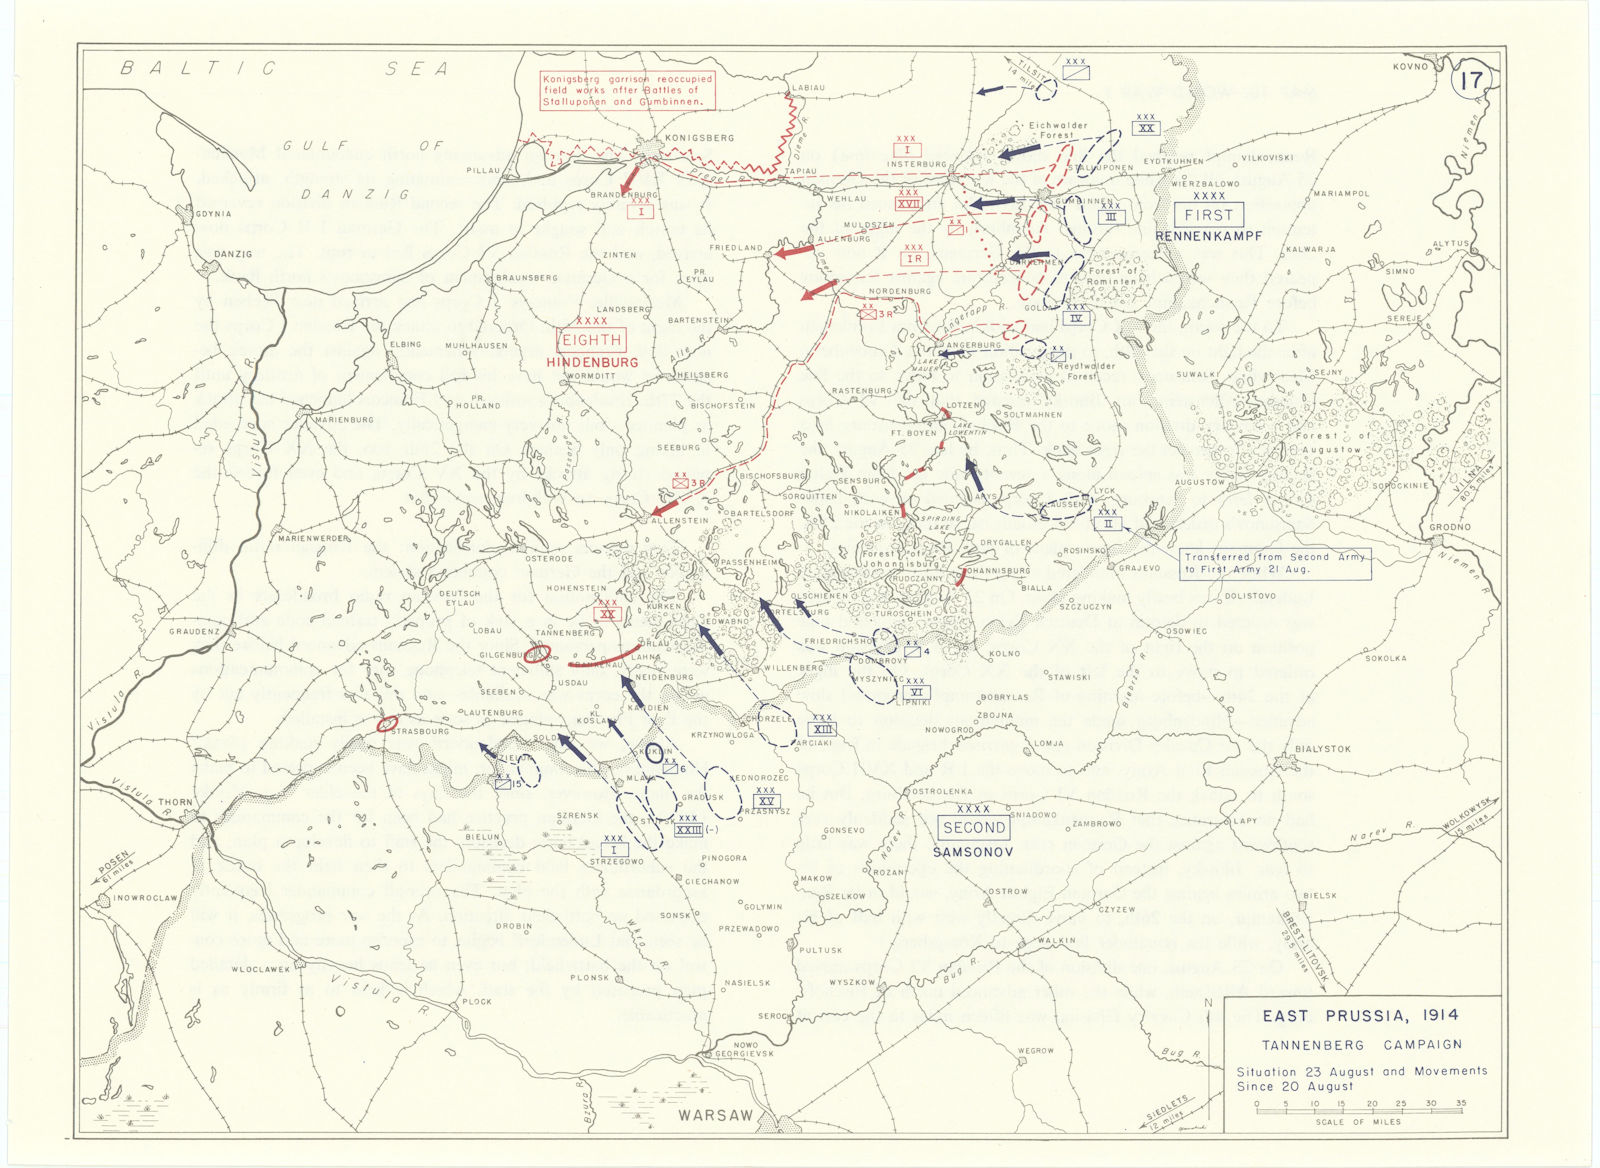 Associate Product World War 1. East Prussia 20-23 August 1914. Tannenberg Campaign 1959 old map